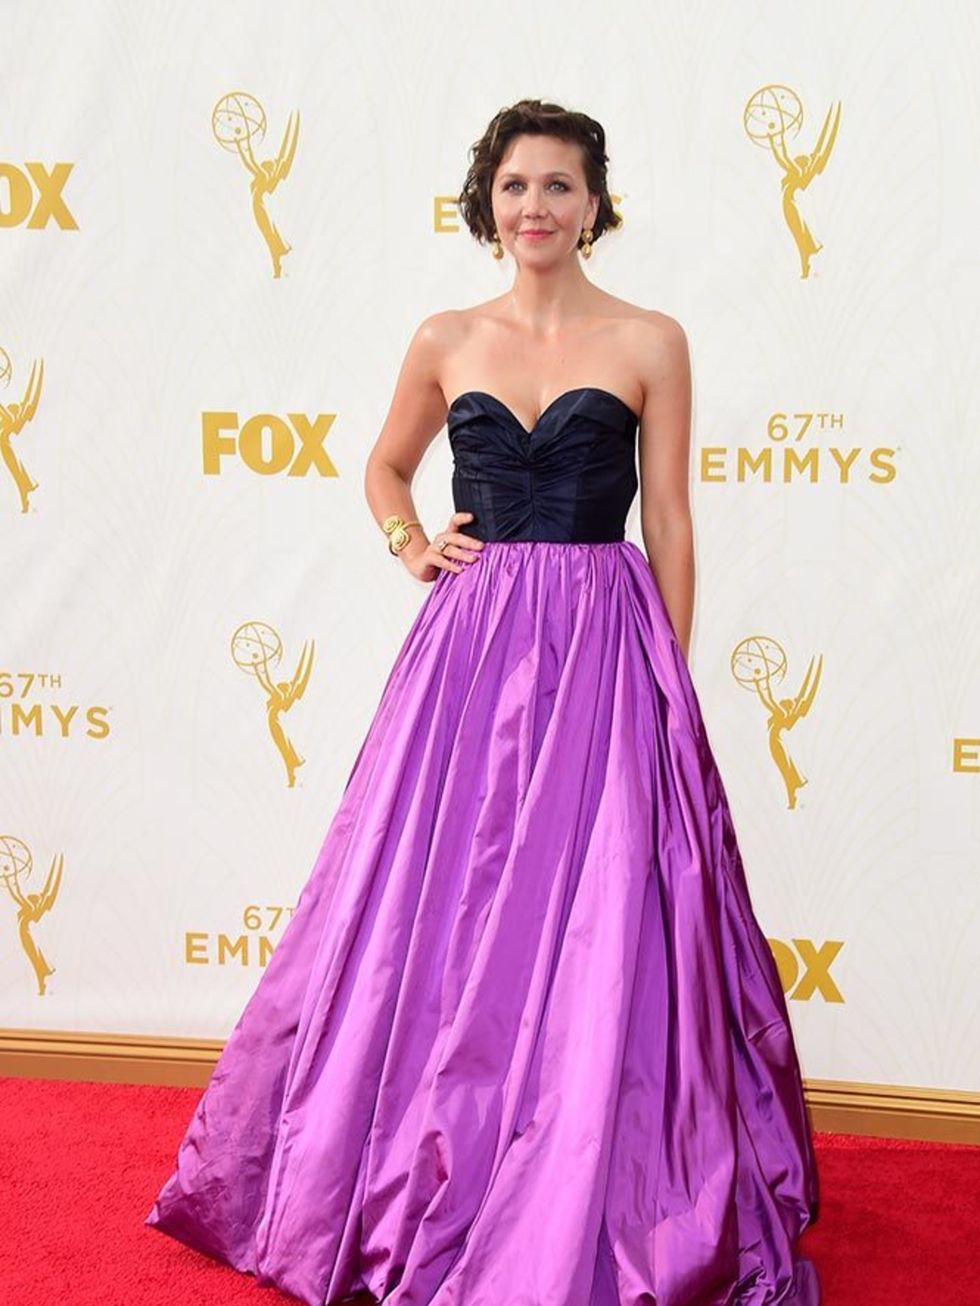 Maggie Gyllenhaal at the Emmy Awards in LA, September 2015.